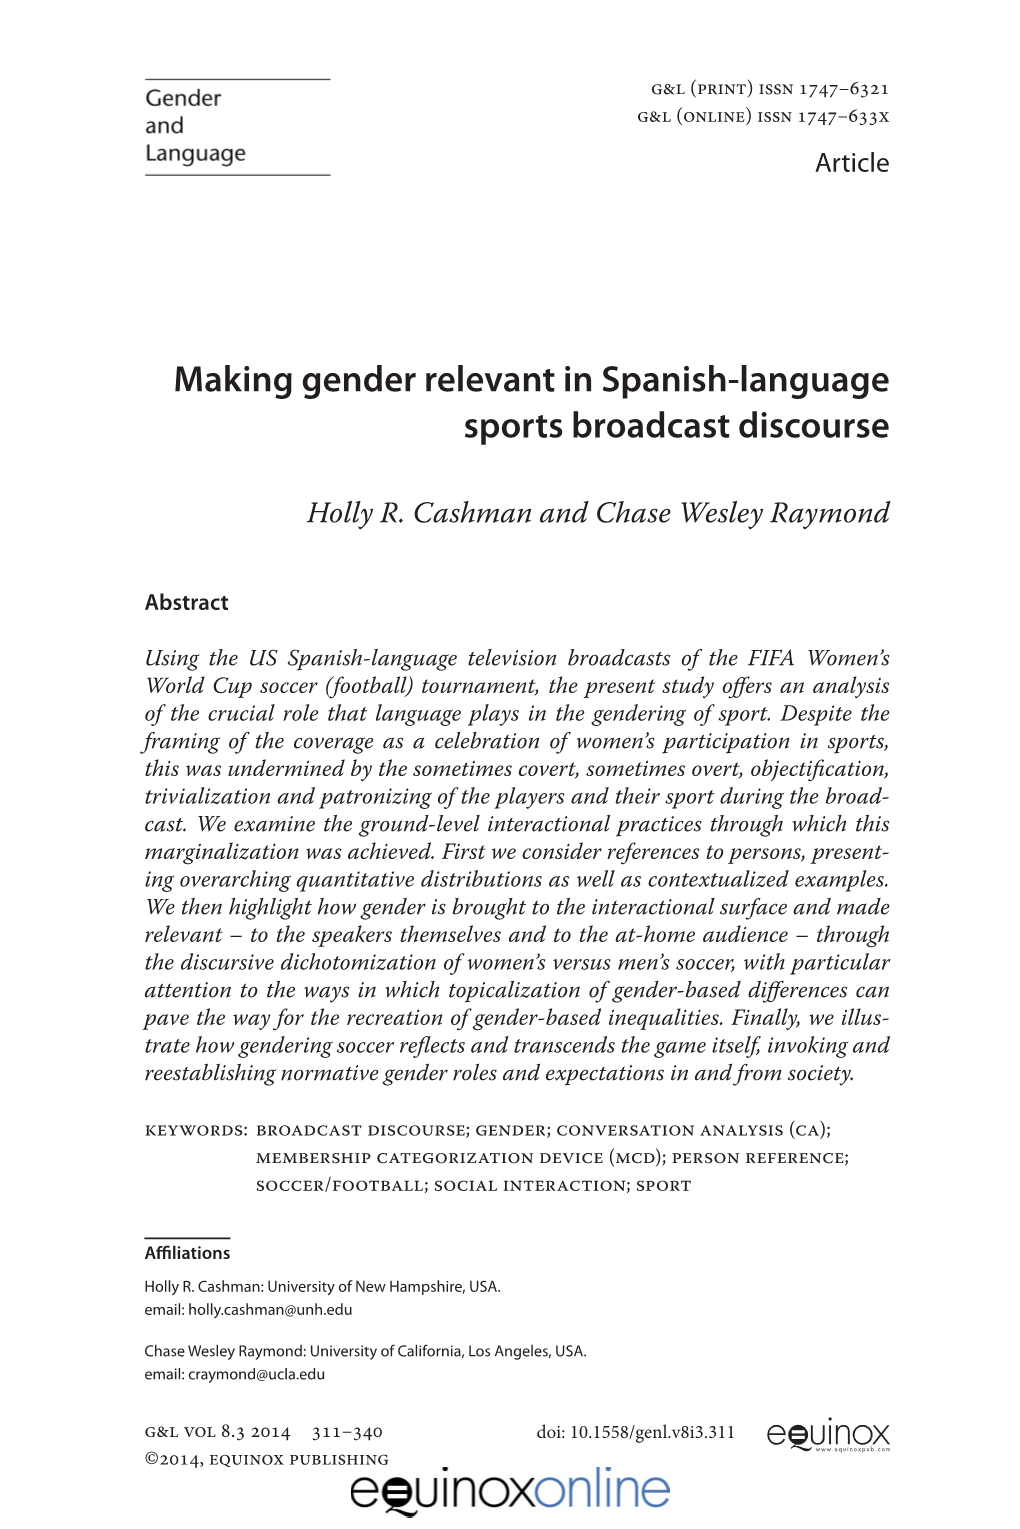 Making Gender Relevant in Spanish-Language Sports Broadcast Discourse